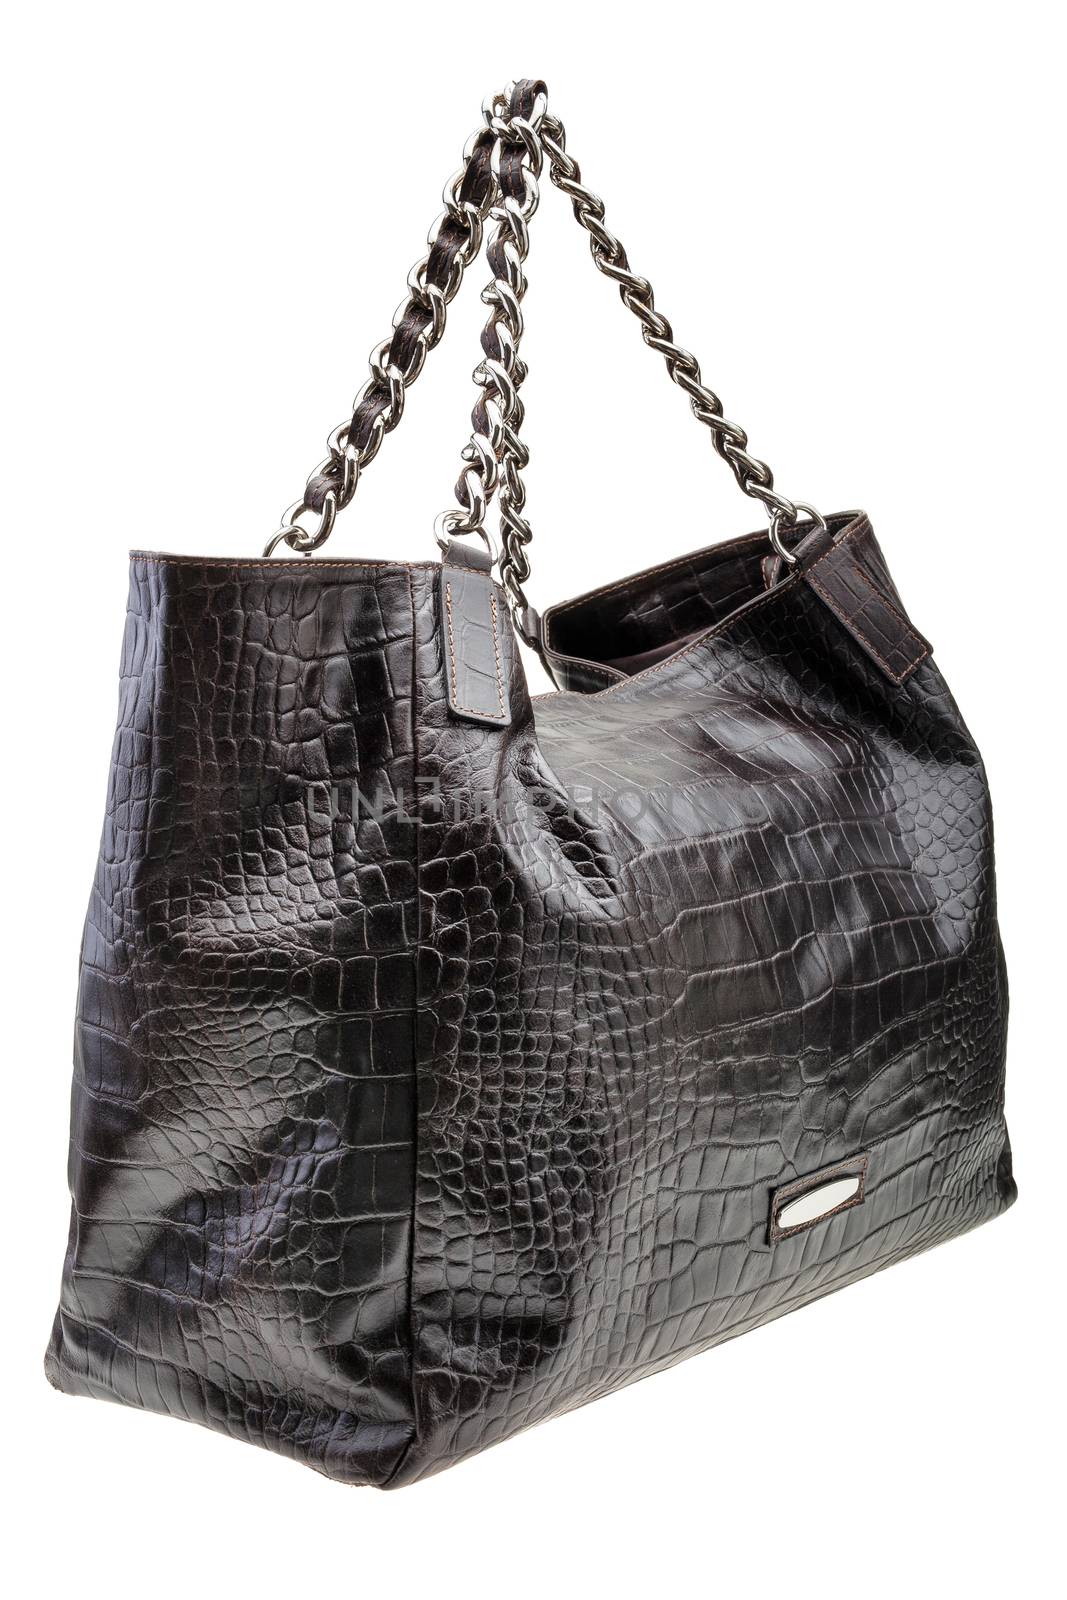 New Black leather womens bag with crocodile texture isolated on white background.